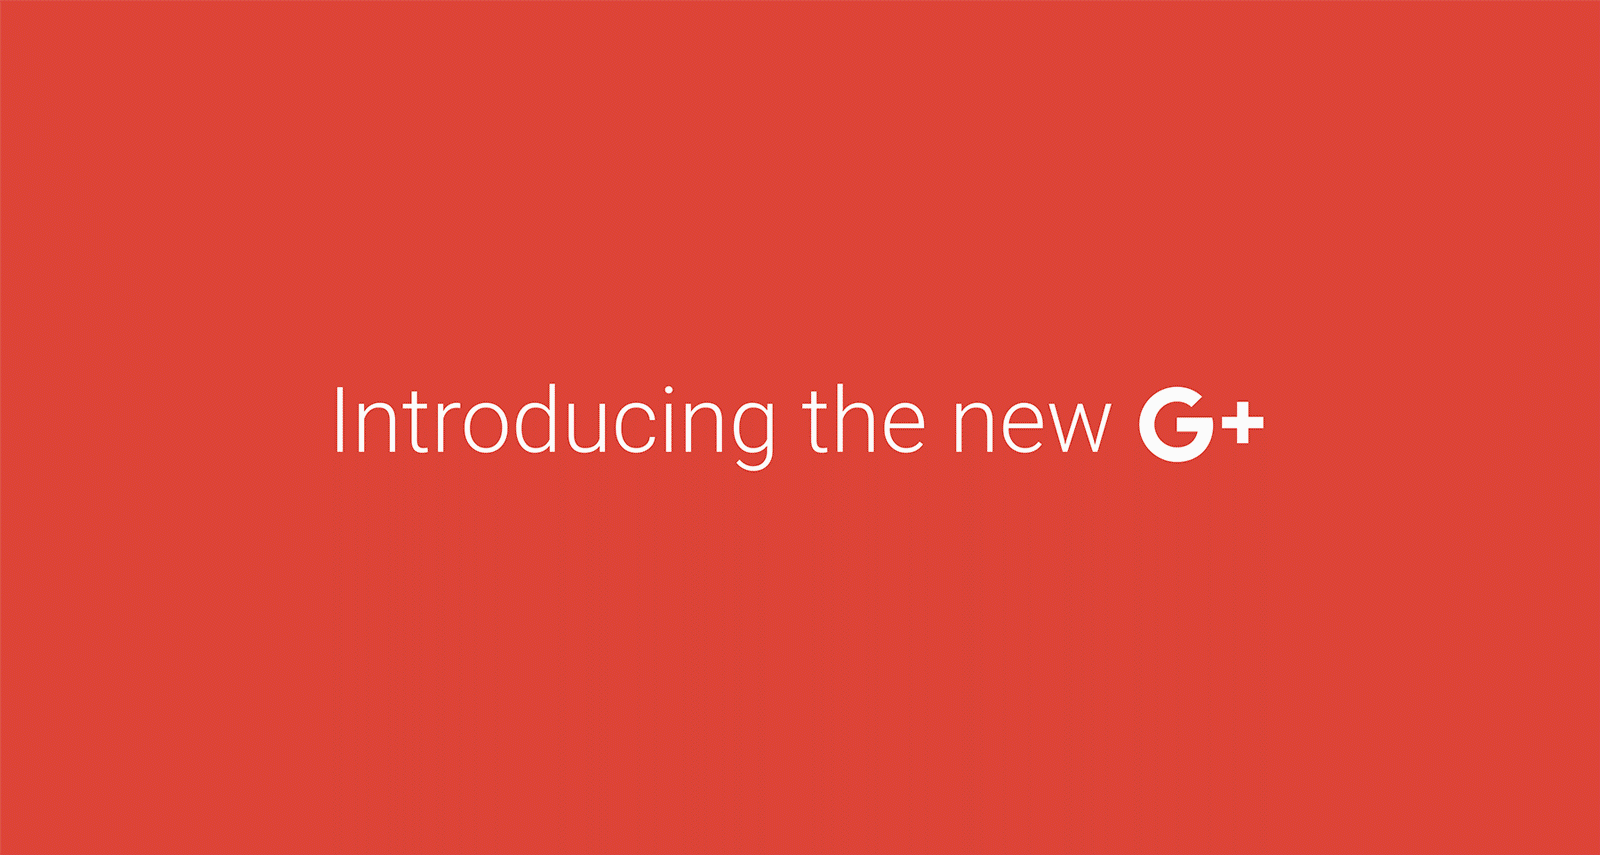 Google+ Gets A Revamp, Now Focusing On Communities And Collections